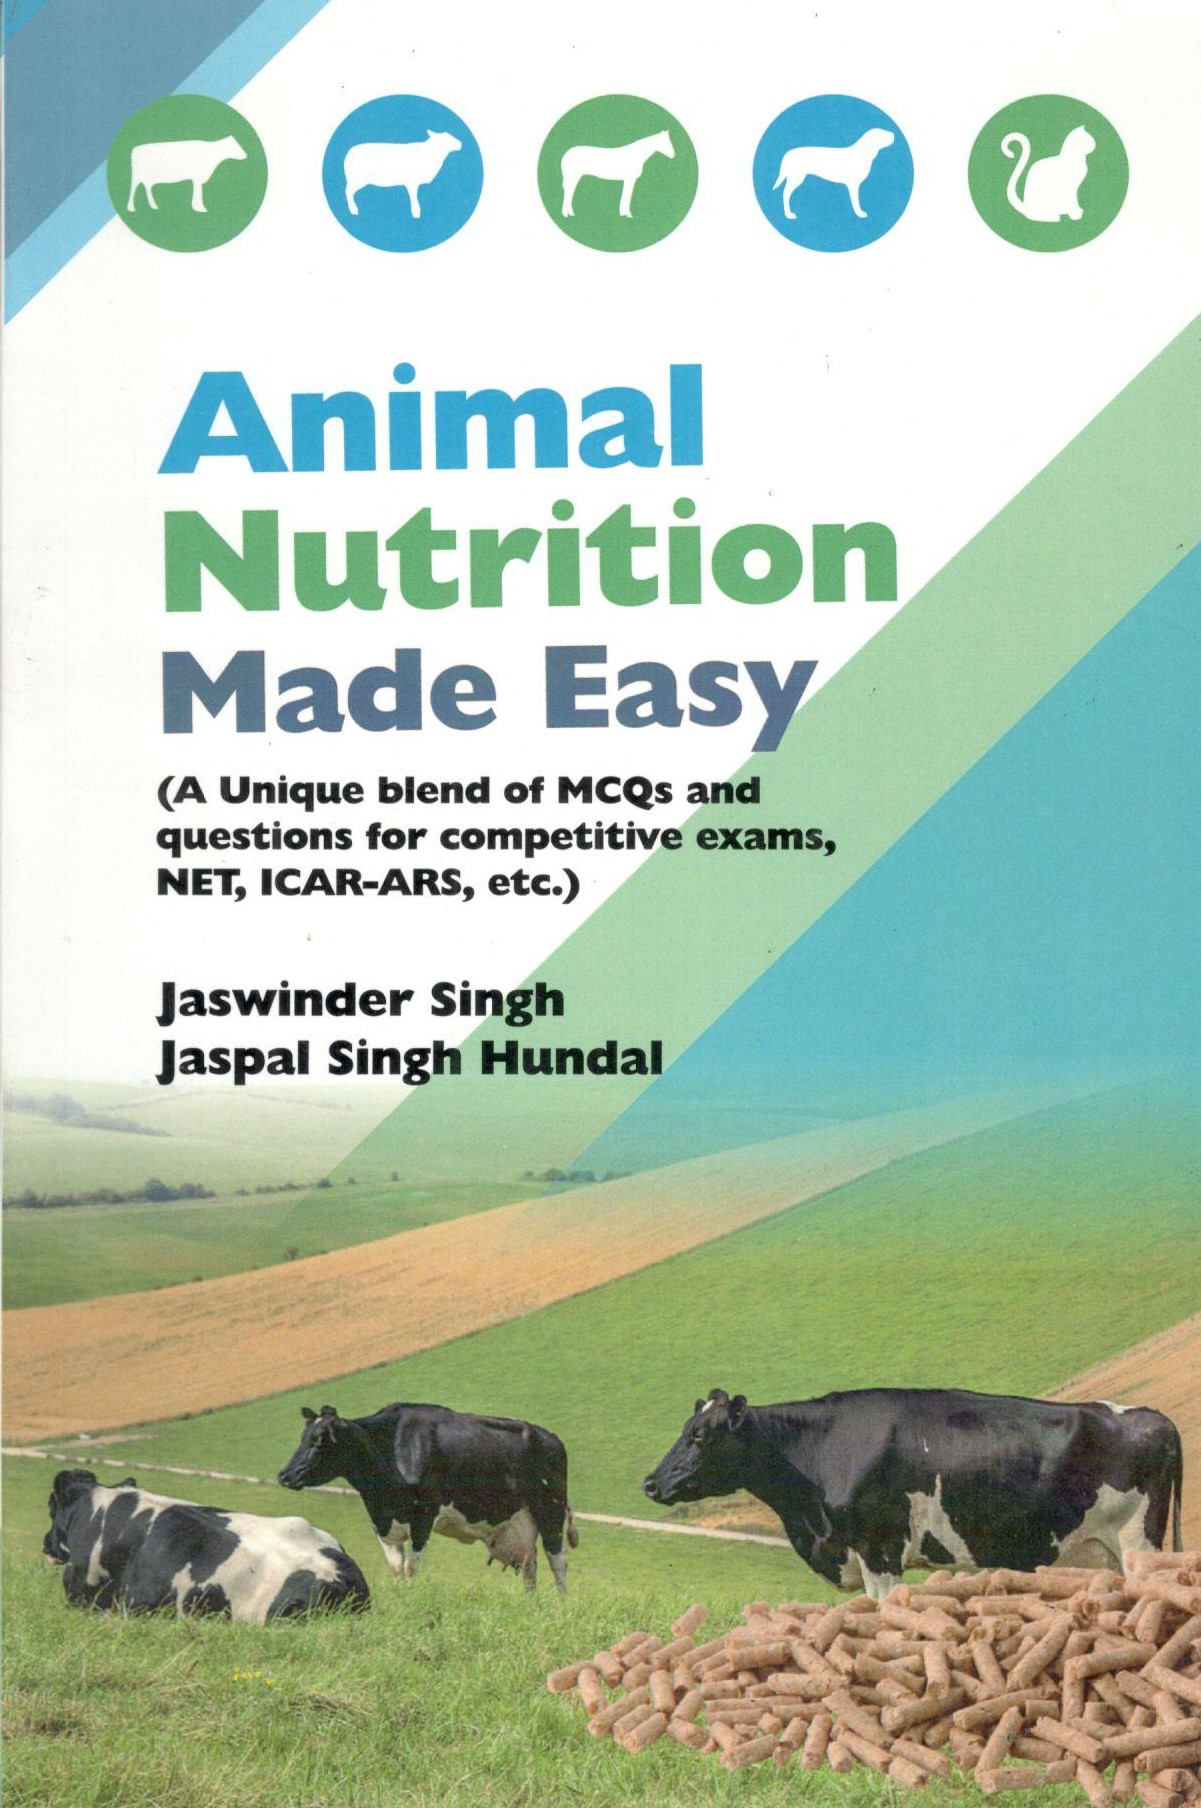 Animal Nutrition Made Easy